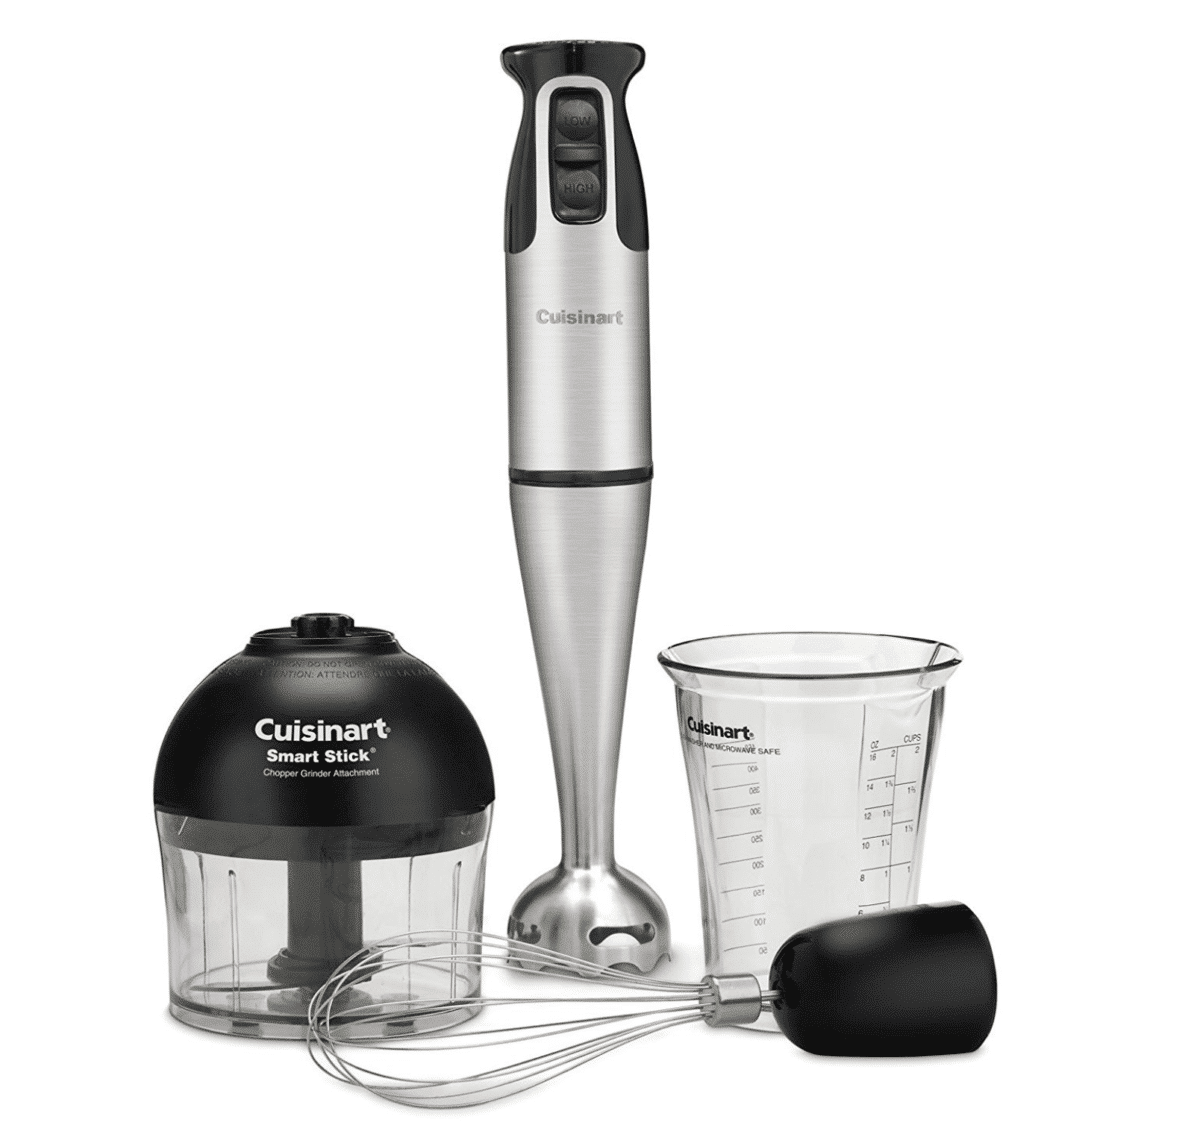 Cuisinart smart immersion blender with attachments